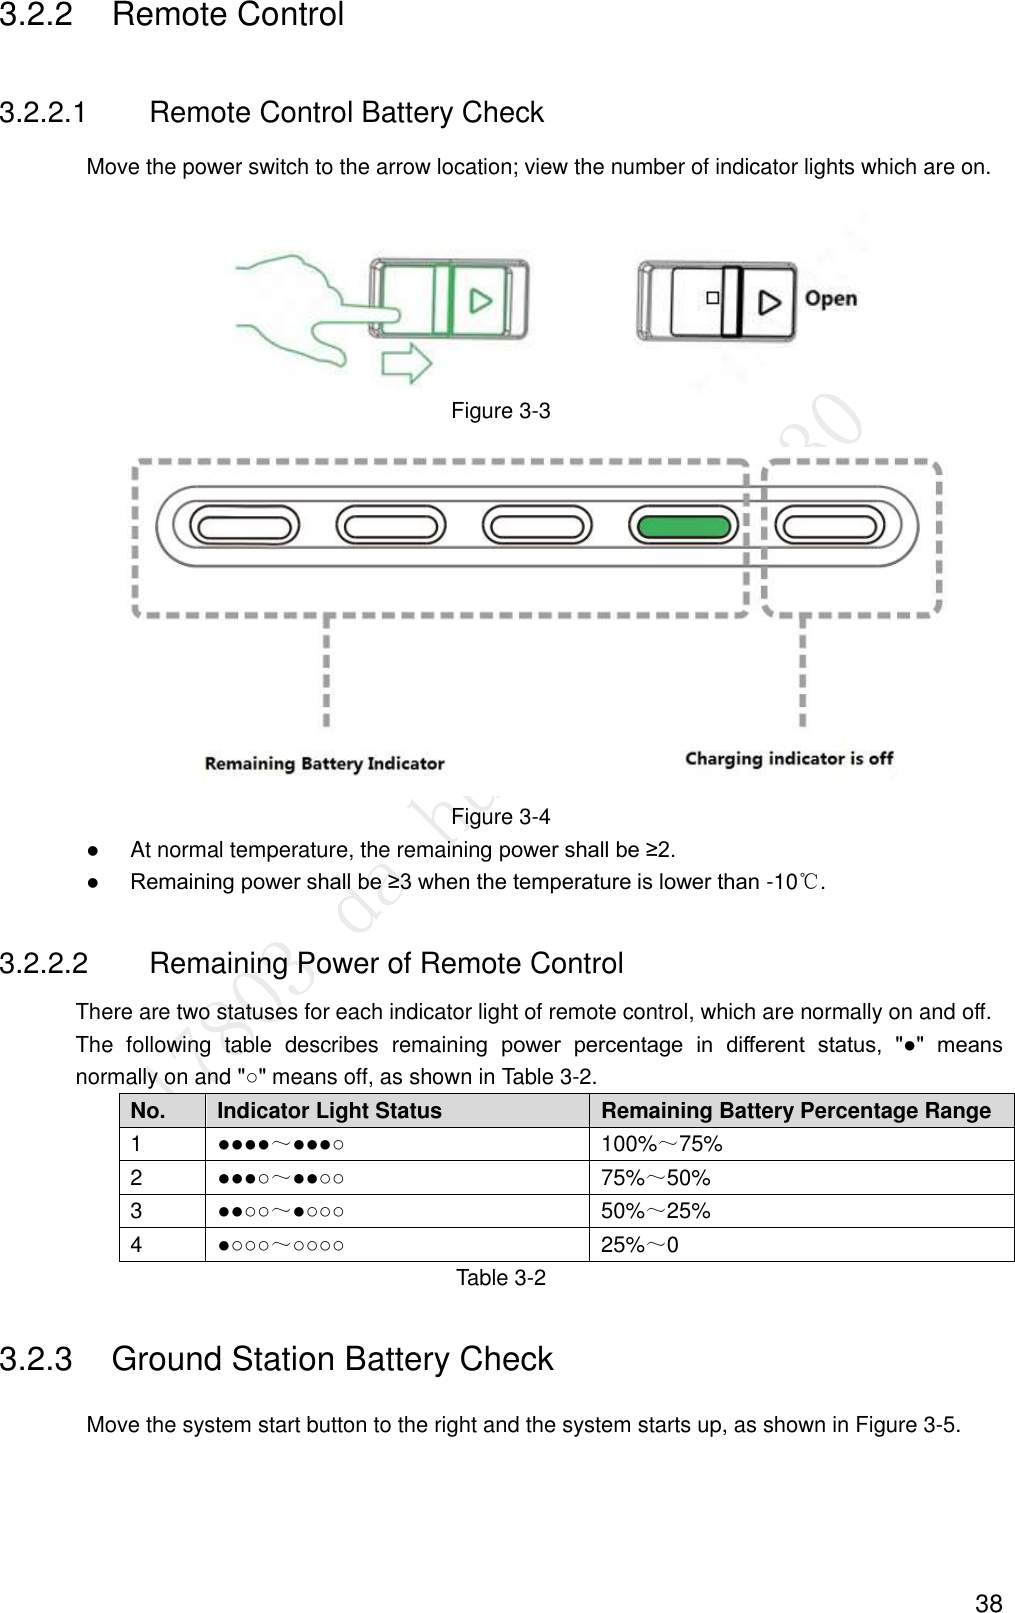  38 3.2.2  Remote Control 3.2.2.1  Remote Control Battery Check Move the power switch to the arrow location; view the number of indicator lights which are on.  Figure 3-3  Figure 3-4  At normal temperature, the remaining power shall be ≥2.  Remaining power shall be ≥3 when the temperature is lower than -10℃. 3.2.2.2  Remaining Power of Remote Control There are two statuses for each indicator light of remote control, which are normally on and off. The  following  table  describes  remaining  power  percentage  in  different  status,  &quot;●&quot;  means normally on and &quot;○&quot; means off, as shown in Table 3-2. No. Indicator Light Status Remaining Battery Percentage Range 1 ●●●●～●●●○ 100%～75% 2 ●●●○～●●○○ 75%～50% 3 ●●○○～●○○○ 50%～25% 4 ●○○○～○○○○ 25%～0 Table 3-2 3.2.3  Ground Station Battery Check Move the system start button to the right and the system starts up, as shown in Figure 3-5. 